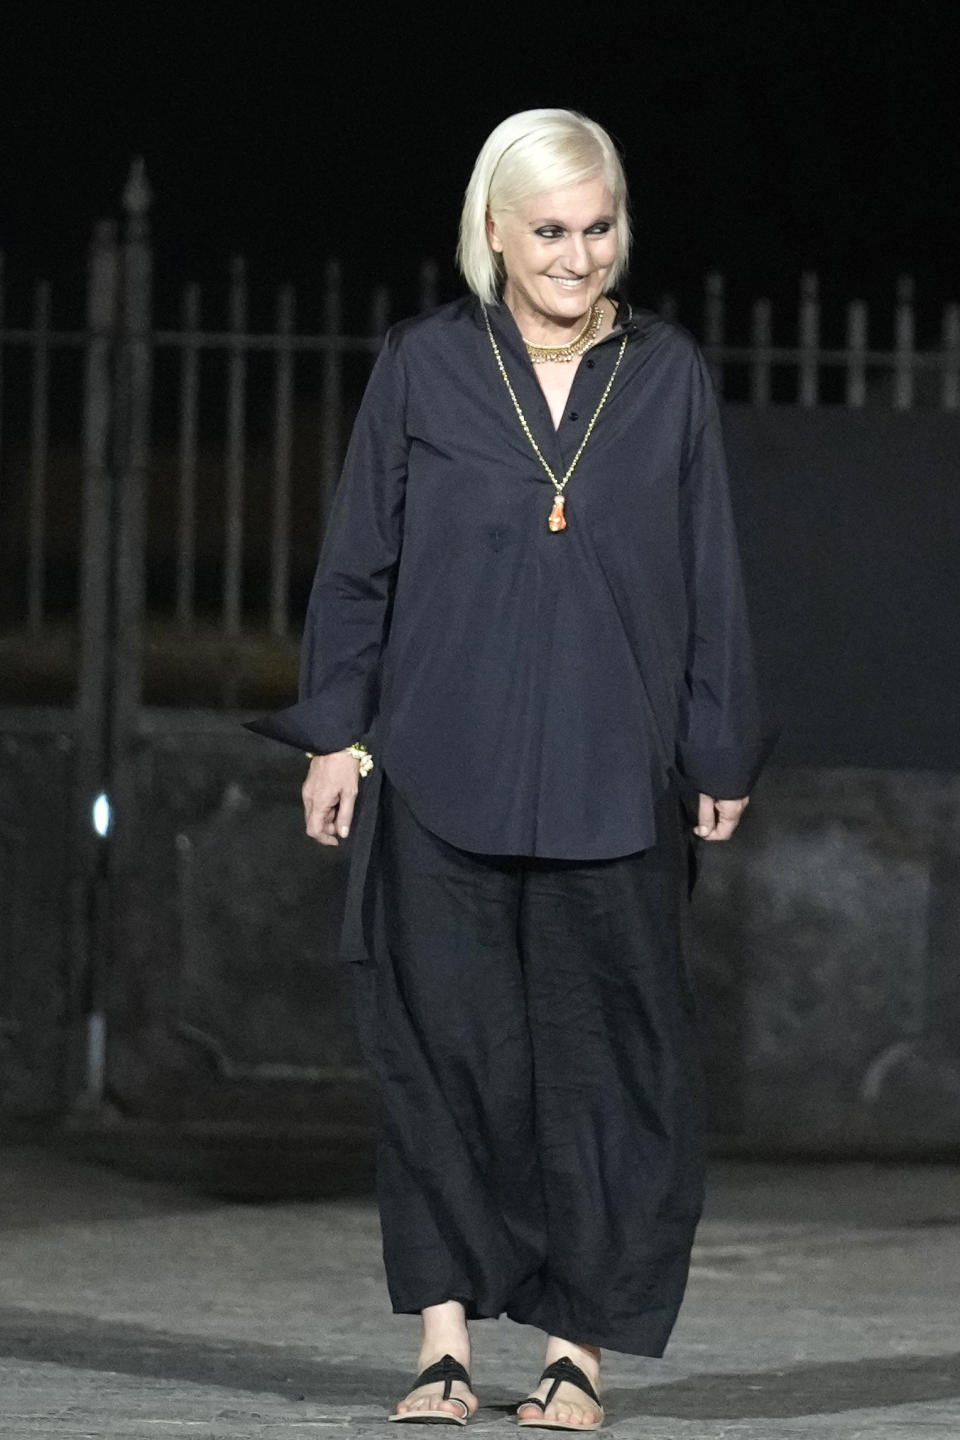 Dior's Creative Director Maria Grazia Chiuri acknowledges the crowd at the end of the Dior Pre-Fall 2023 collection at the Gateway of India landmark monument in Mumbai, India, Thursday, March 30, 2023. (AP Photo/Rafiq Maqbool)